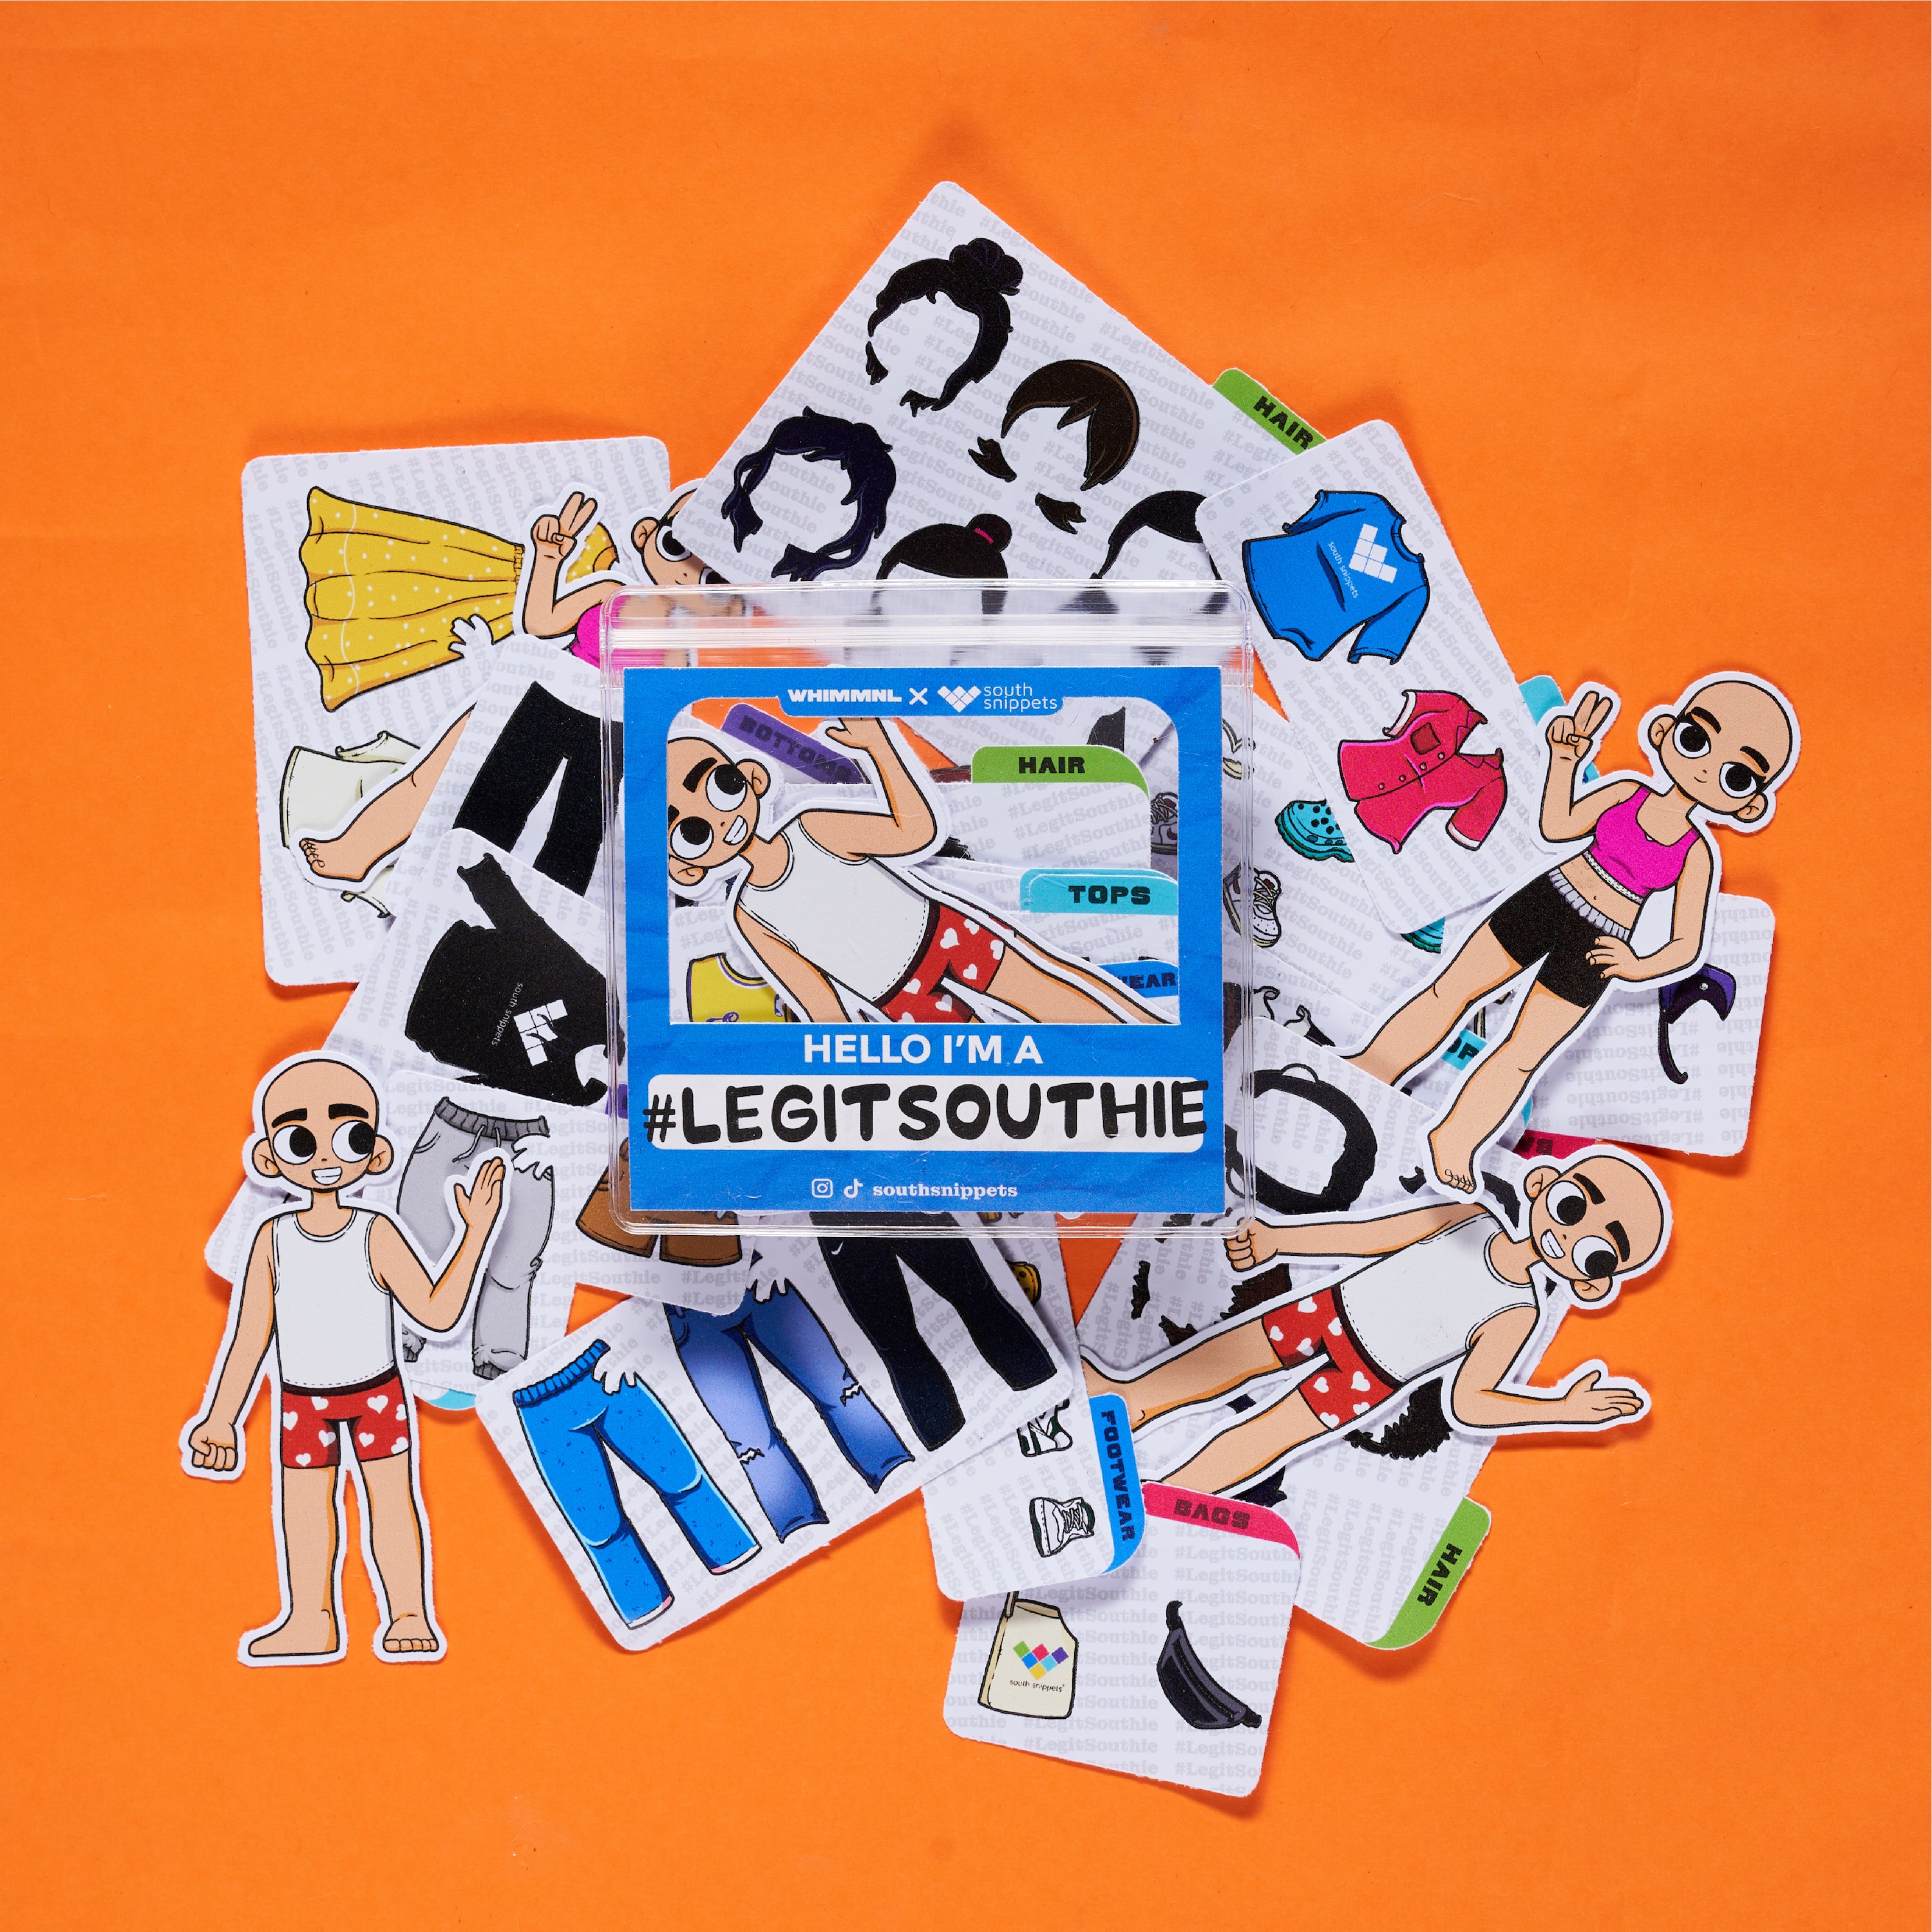 [Whim x South Snippets] #LegitSouthie Sticker Doll Male Pack